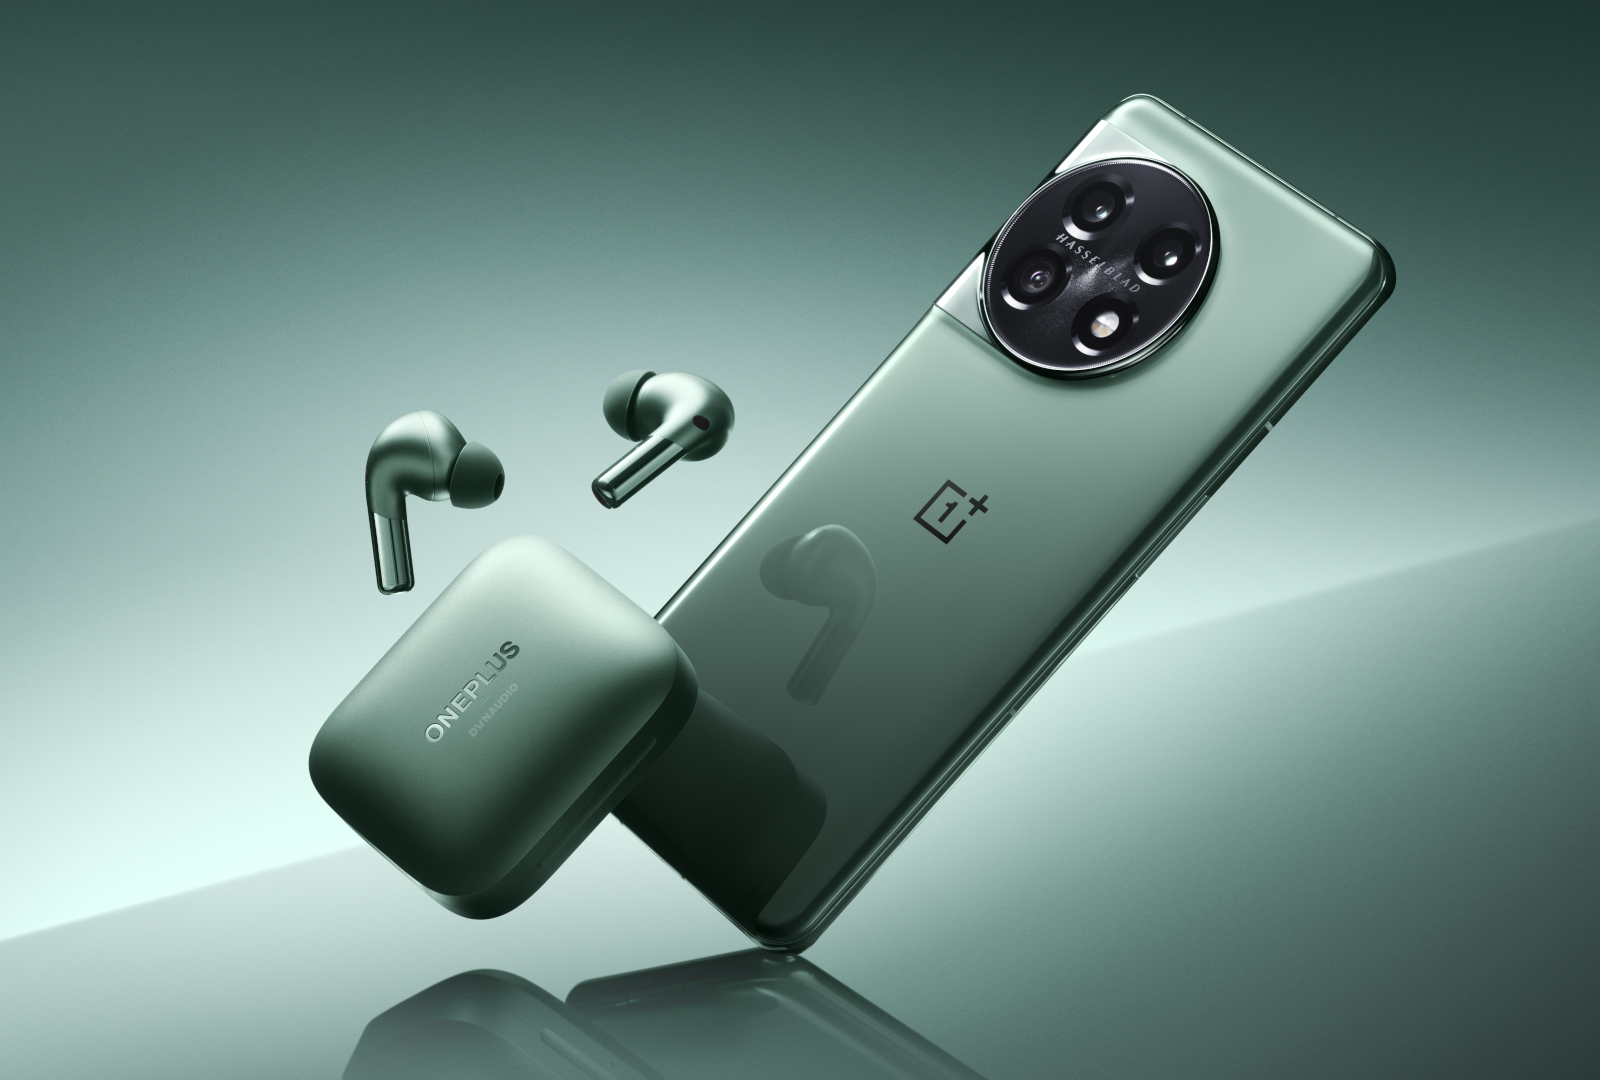 OnePlus 11 5G and Buds Pro 2 will be available in China on January 9th